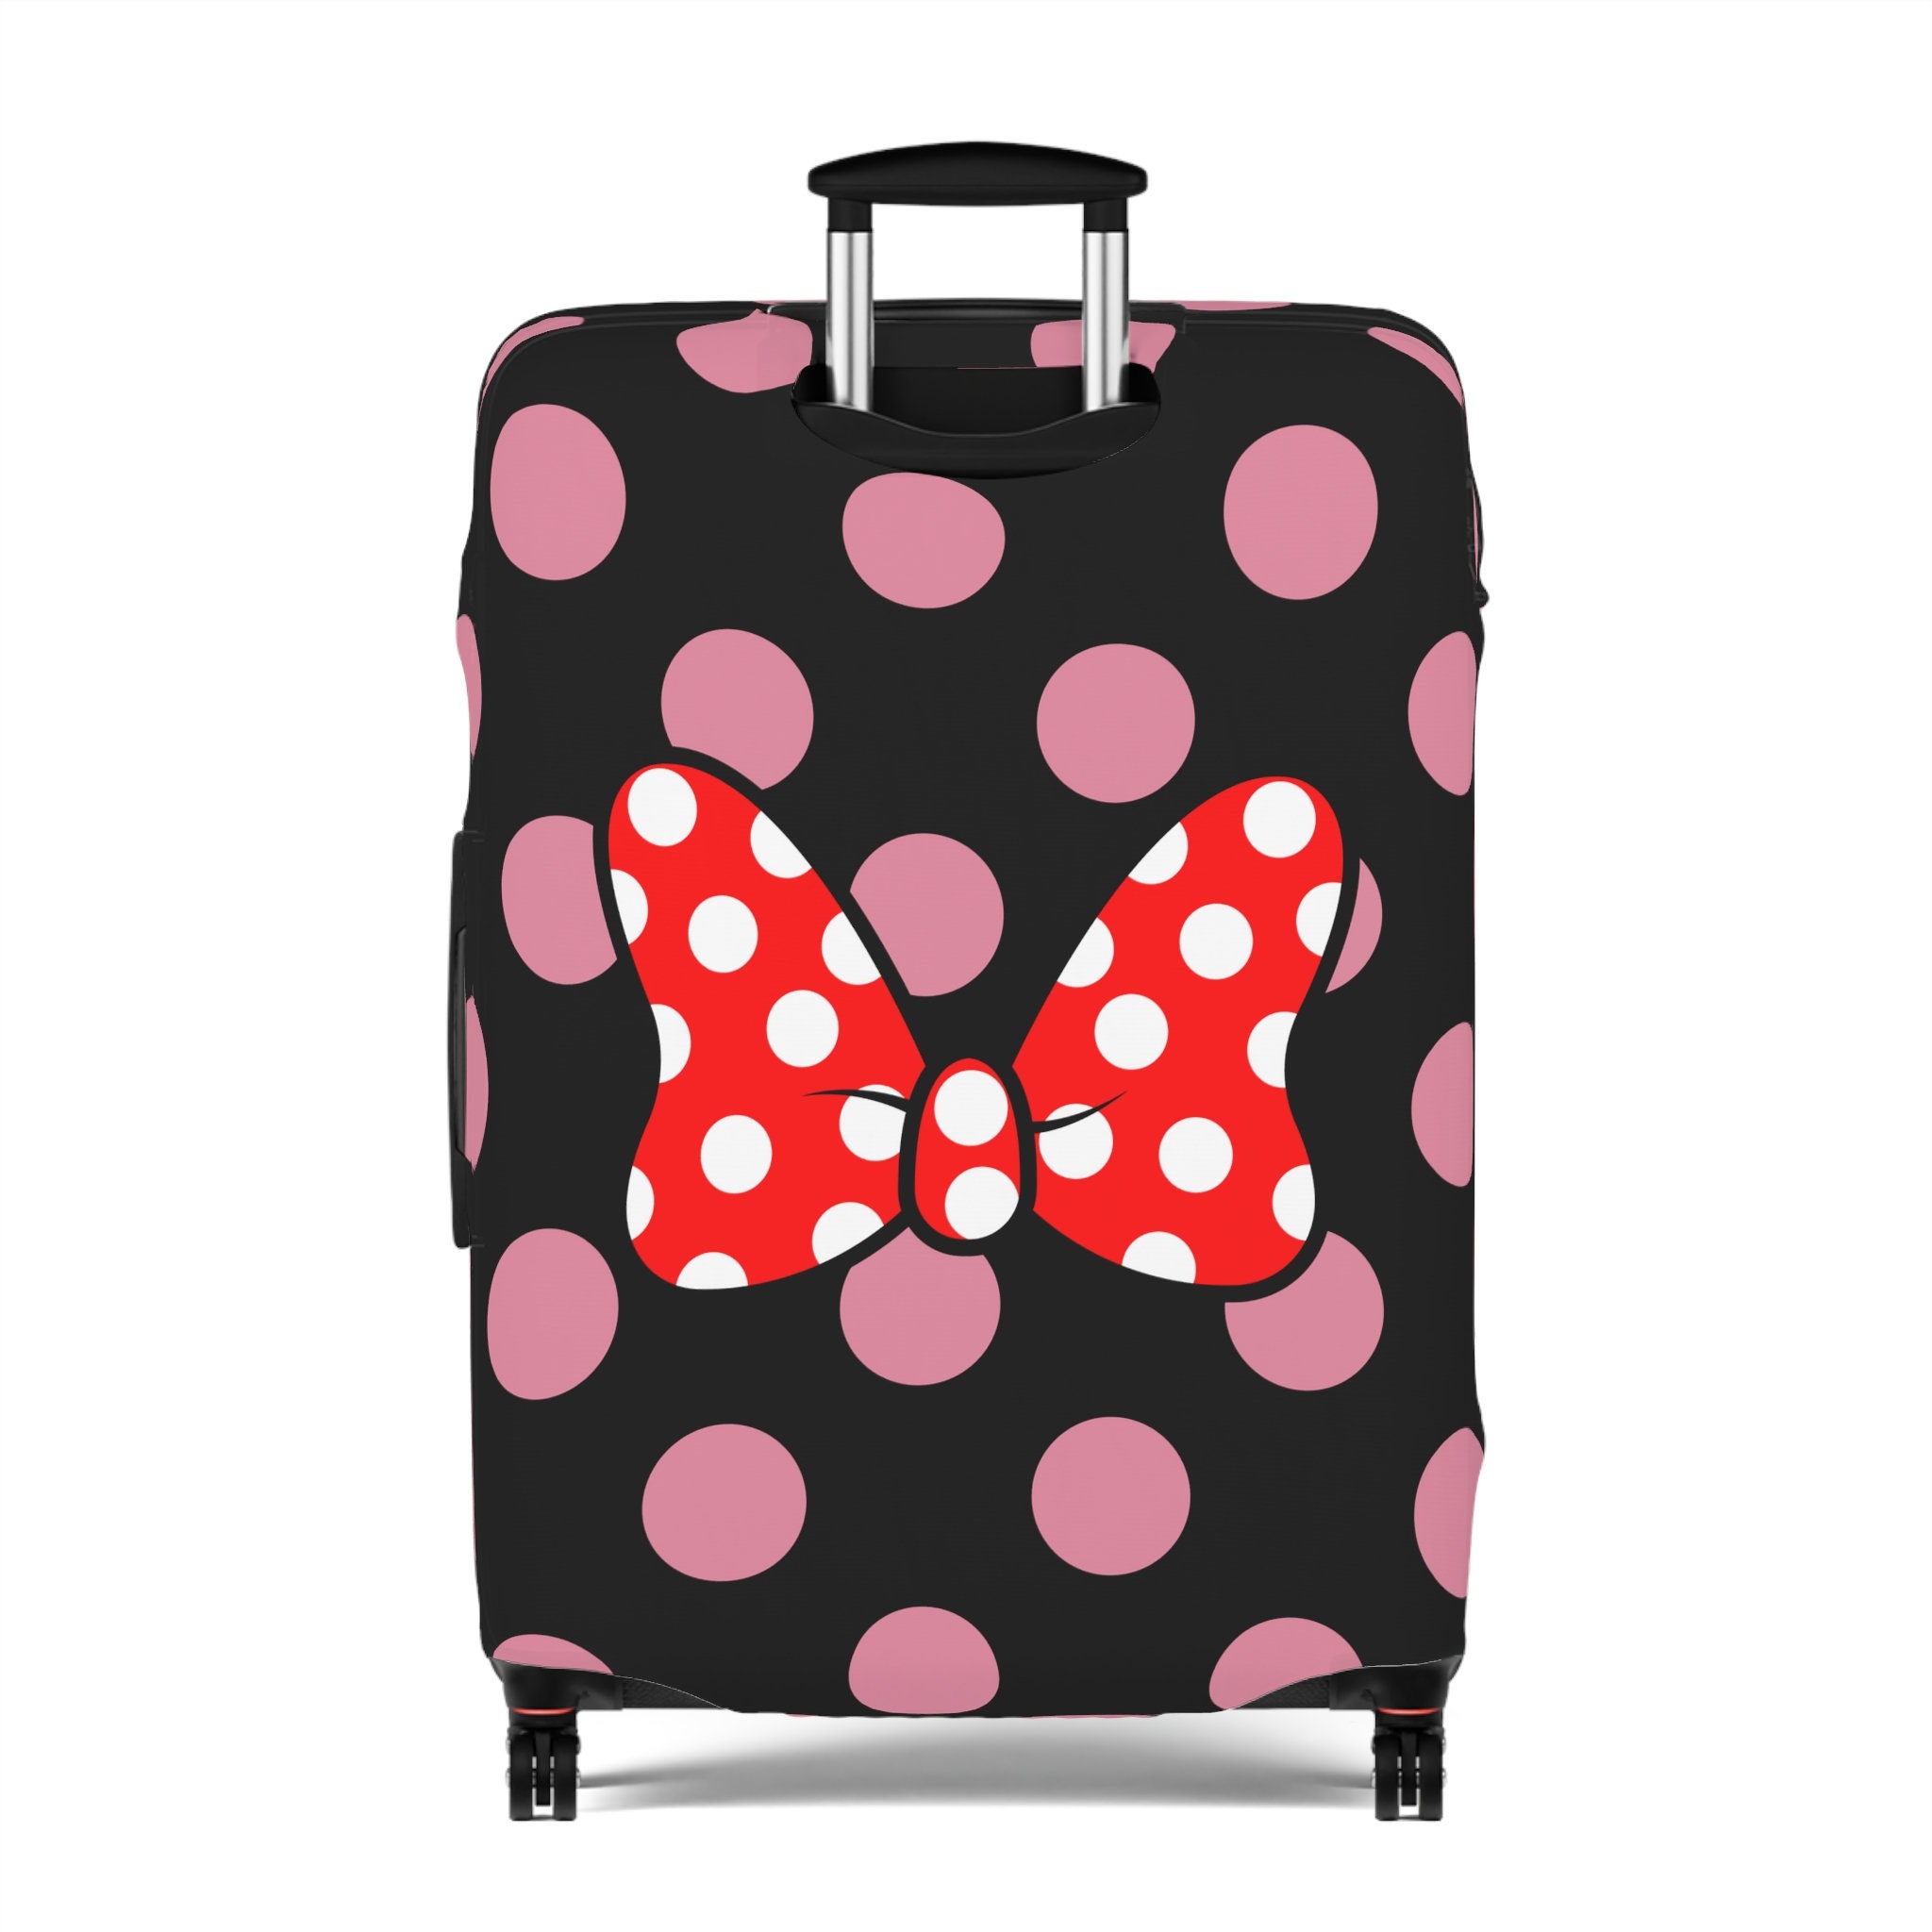 Minnie Mouse Inspired Luggage Cover, Printed Suitcase Protector